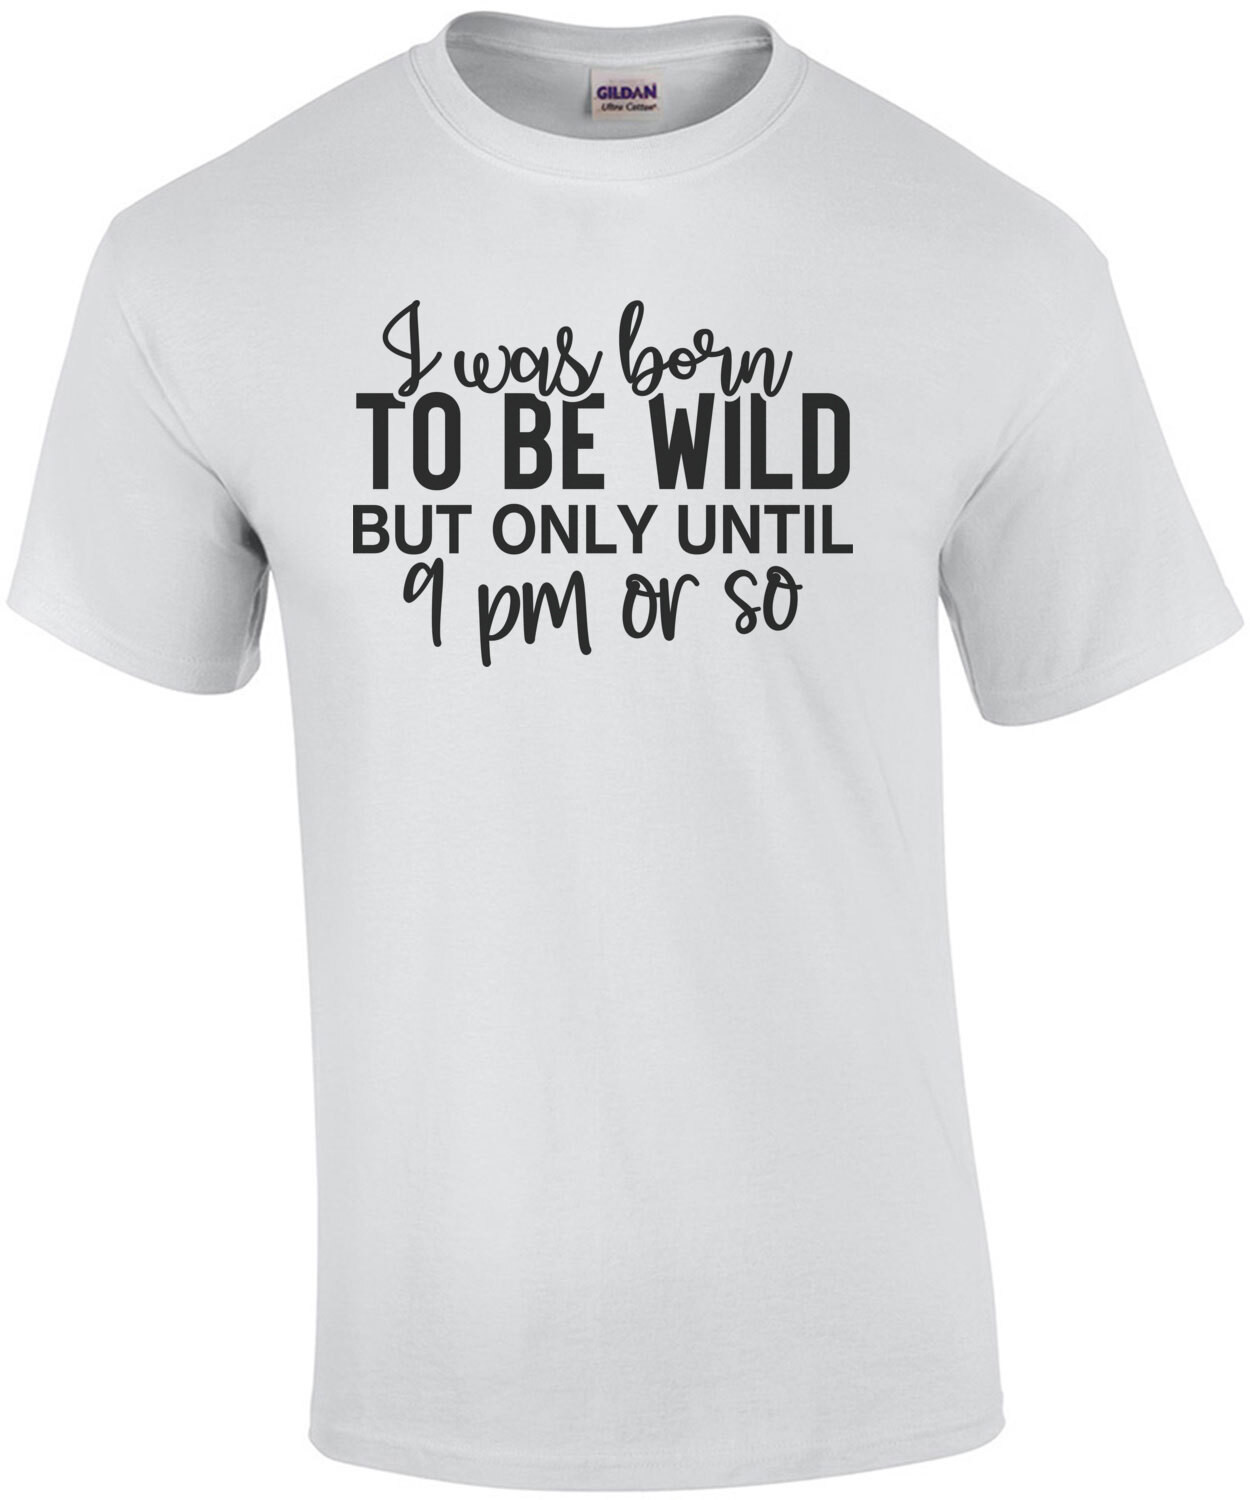 I Was Born To Be Wild But Only Until 9pm Or So Shirt